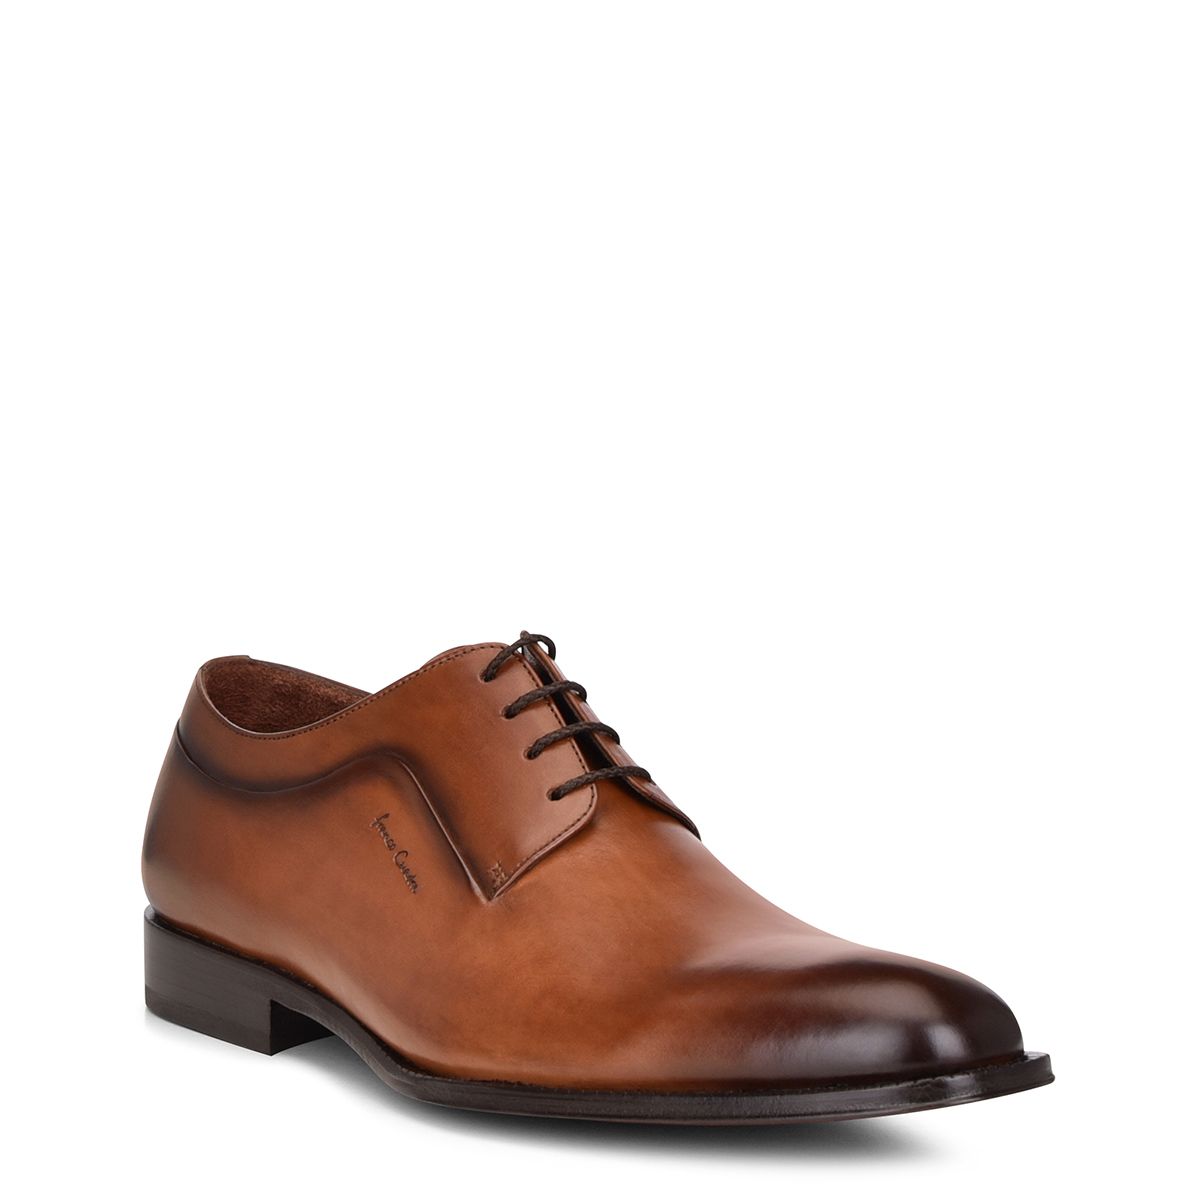 62FBYBY - Cuadra honey classic dress leather plain derby shoes for men-Kuet.us